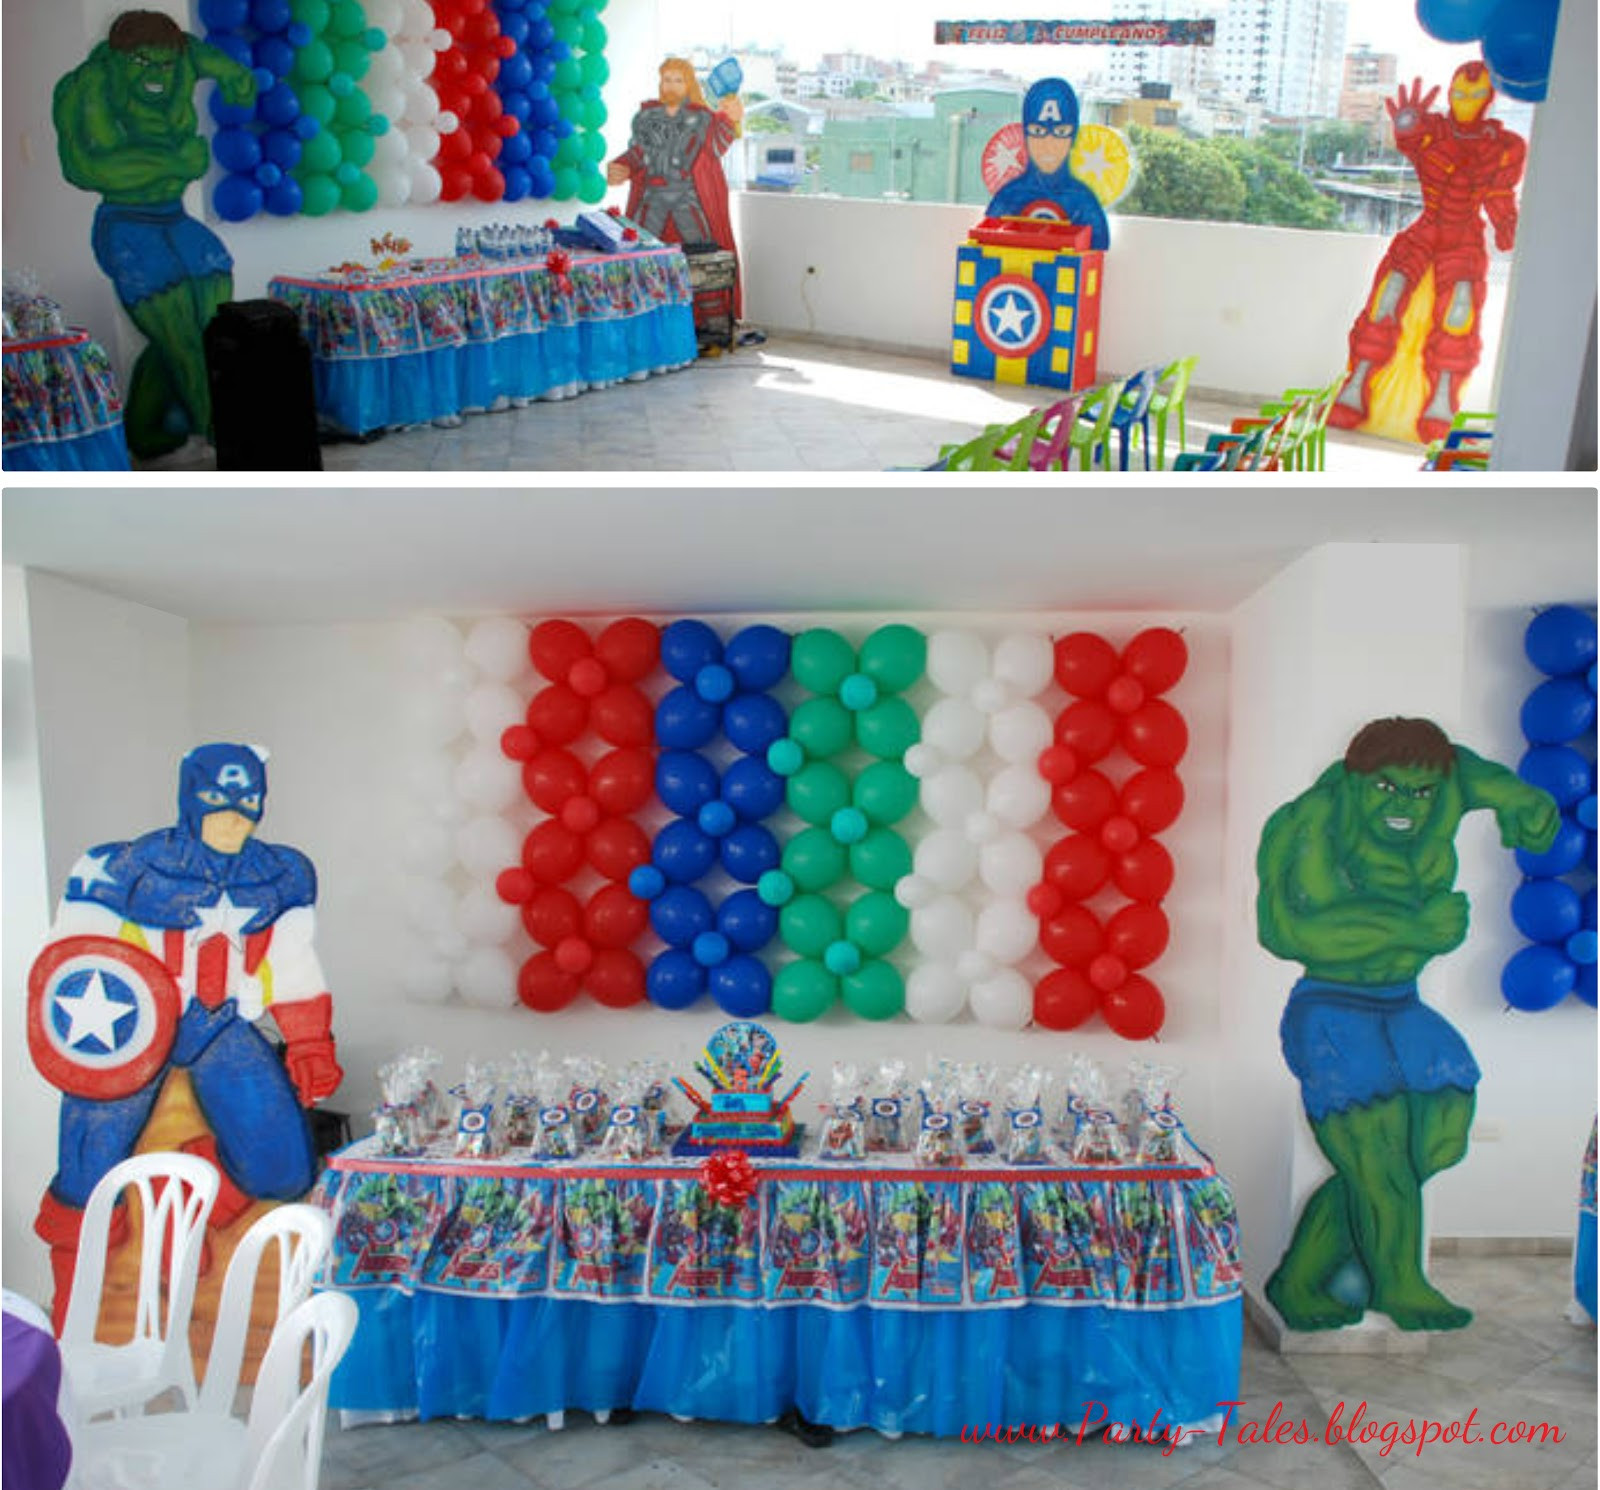 Avengers Birthday Party Decorations
 Party Tales Birthday Party The Avengers